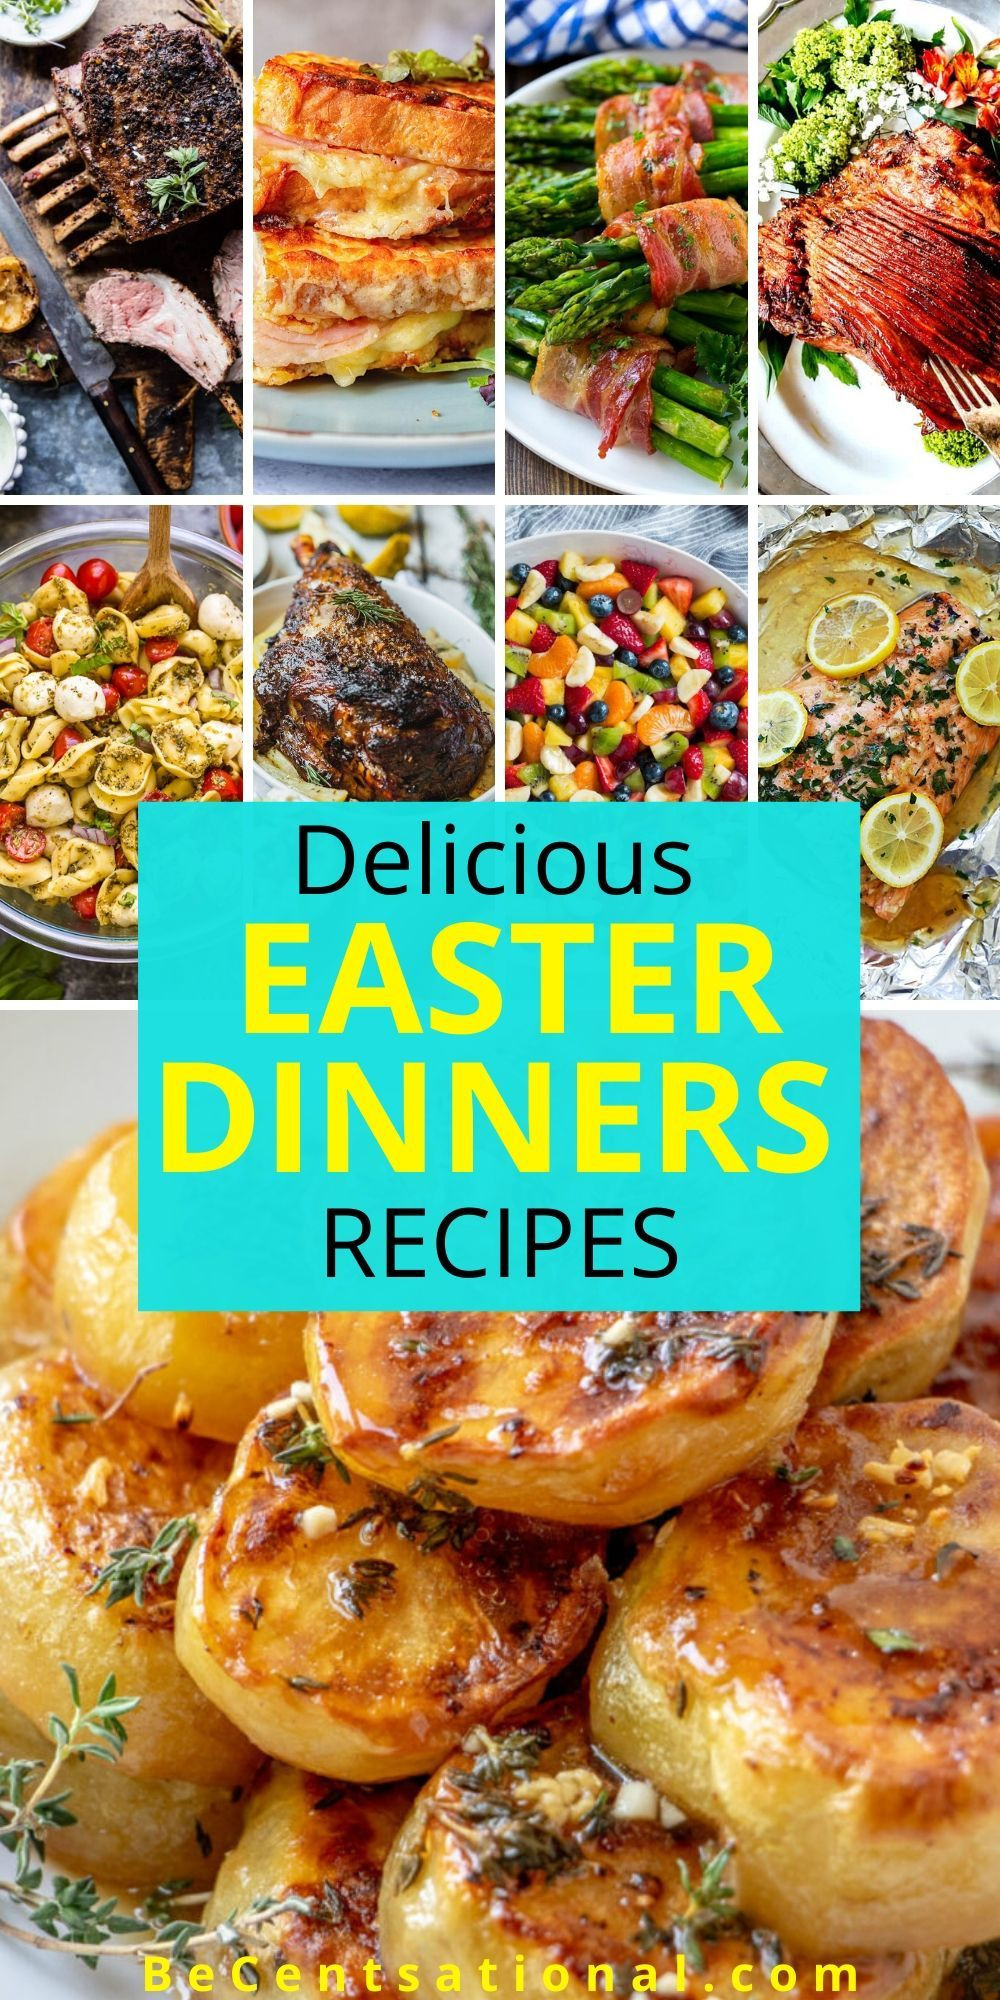 Traditional Easter Dinner Sides
 Easter Dinner Recipes Looking for inspiration for your